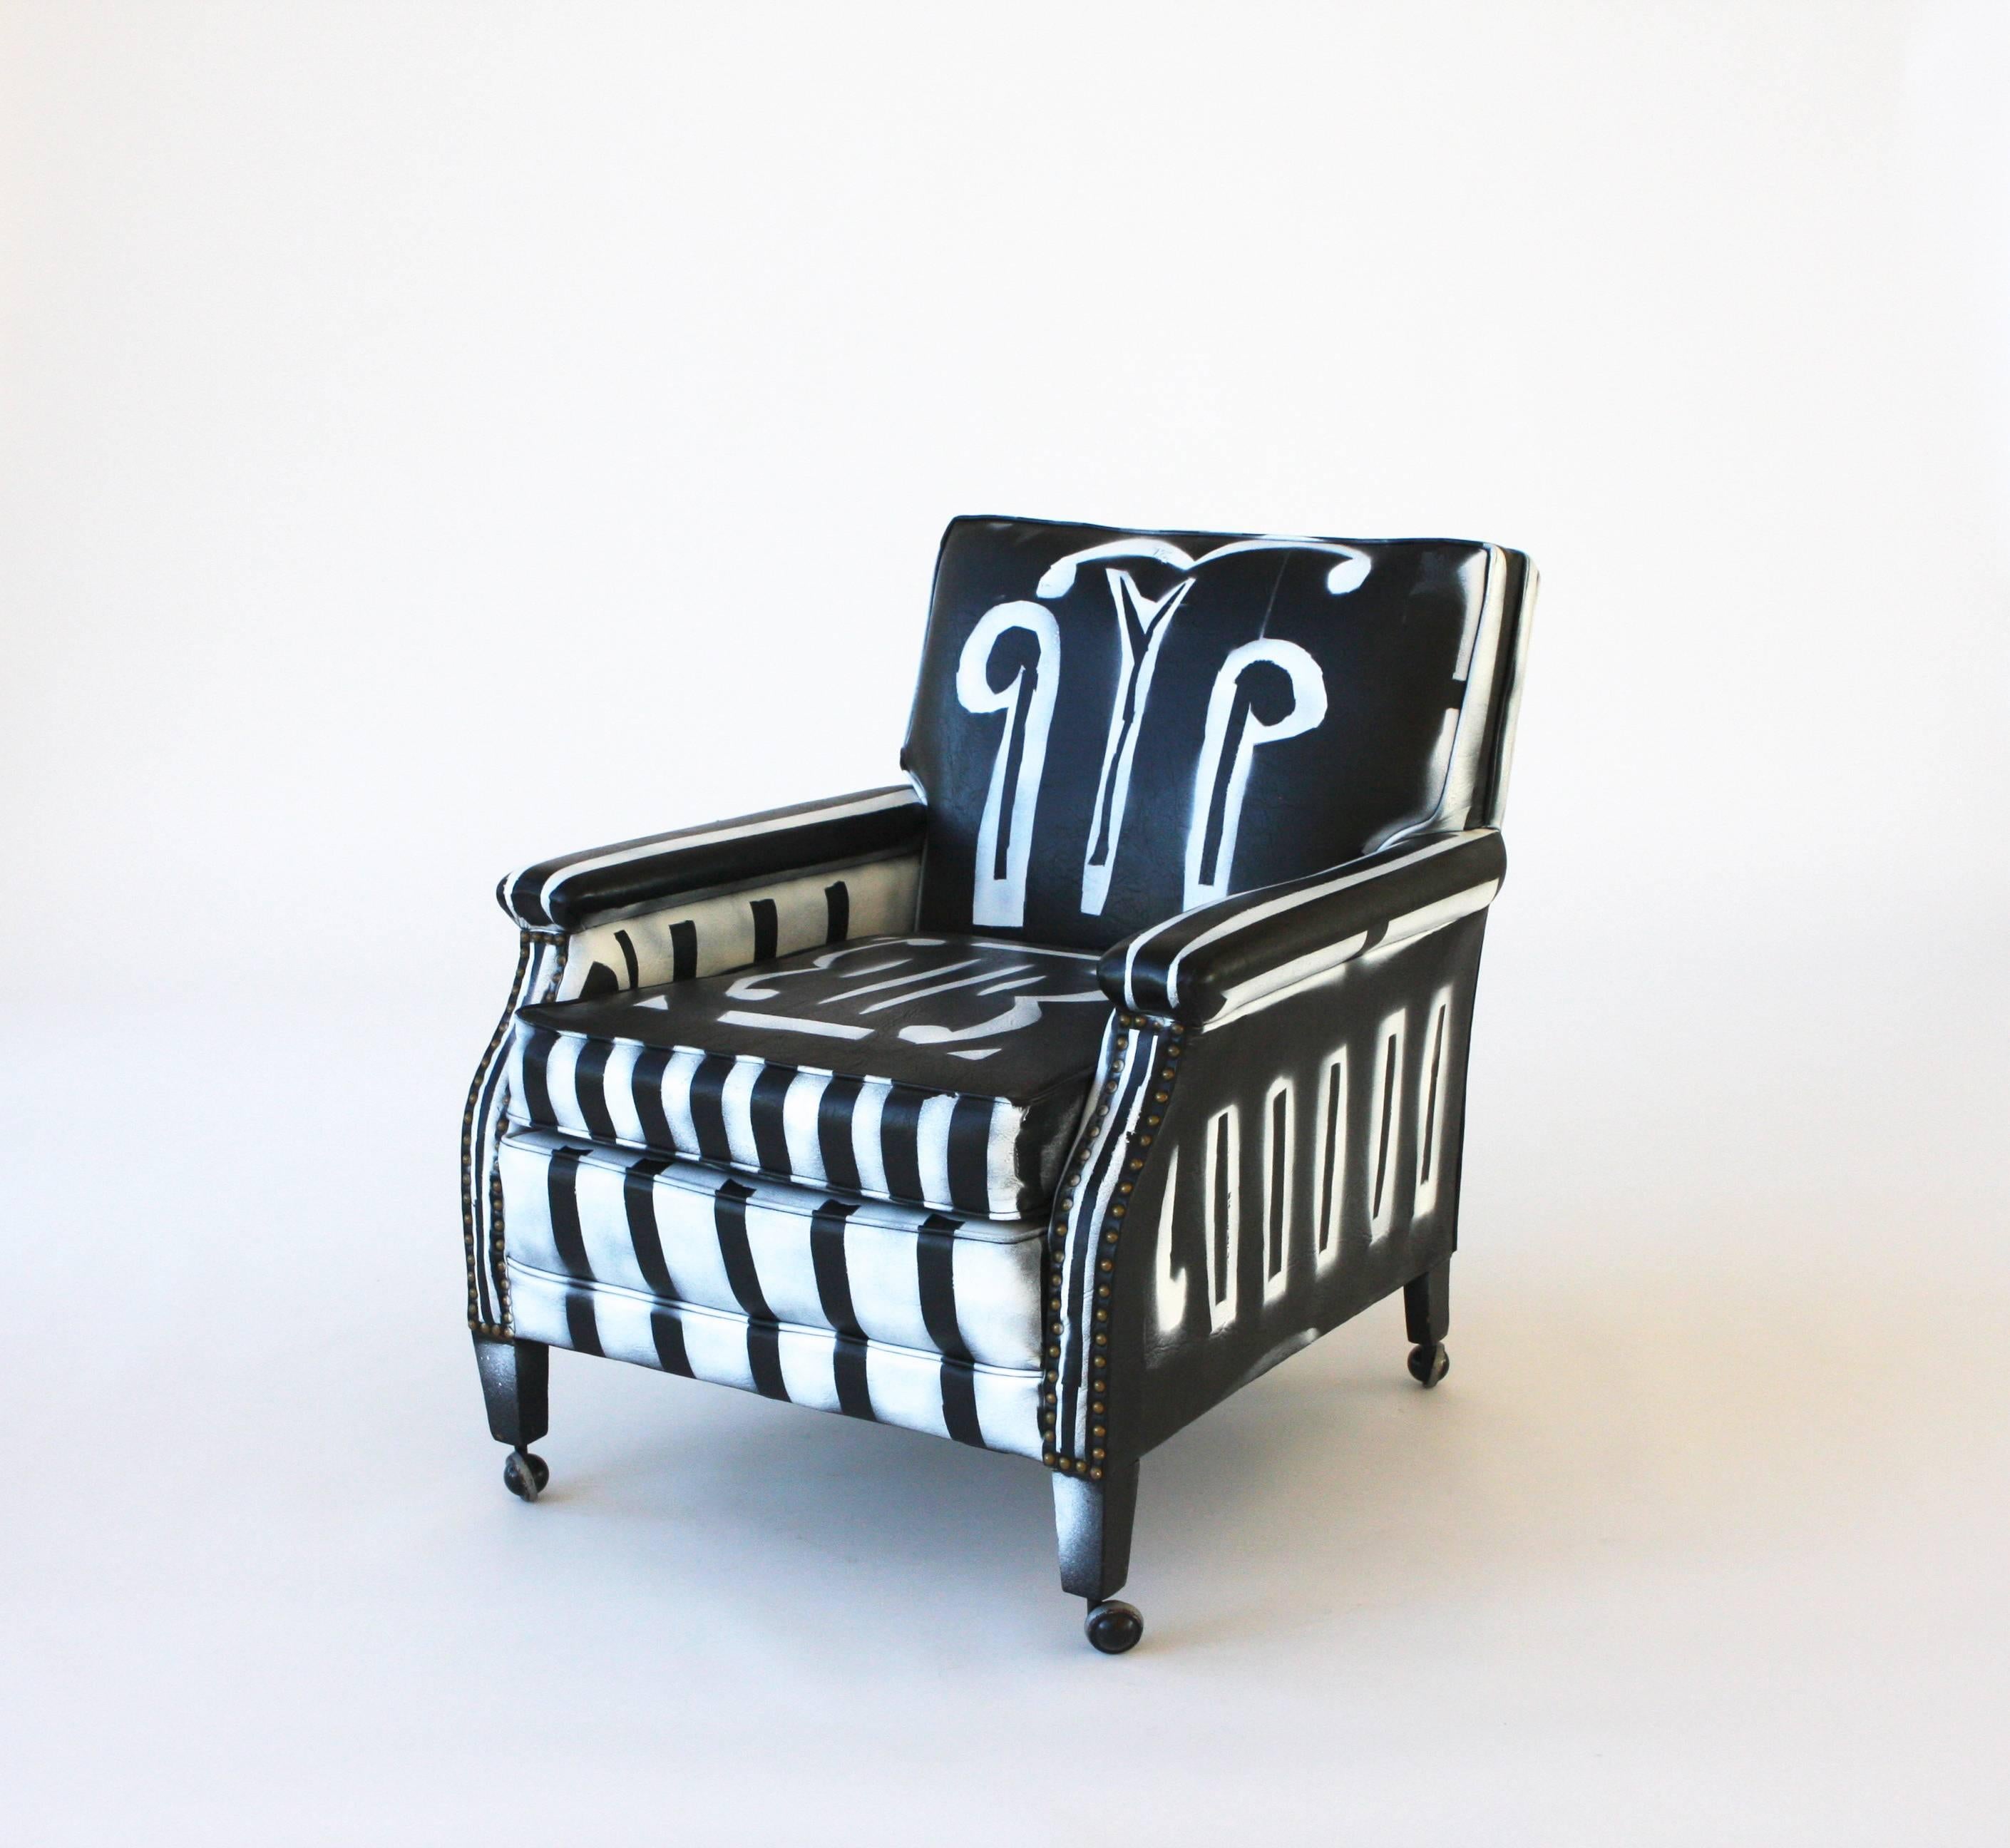 Vintage club chair on casters, black faux leather, hand painted by artist Kim MacConnel.

Kim MaConnel is a southern California based artist who was influential in the seminal Pattern and Decoration Movement of the 1970s and 80s which sought to